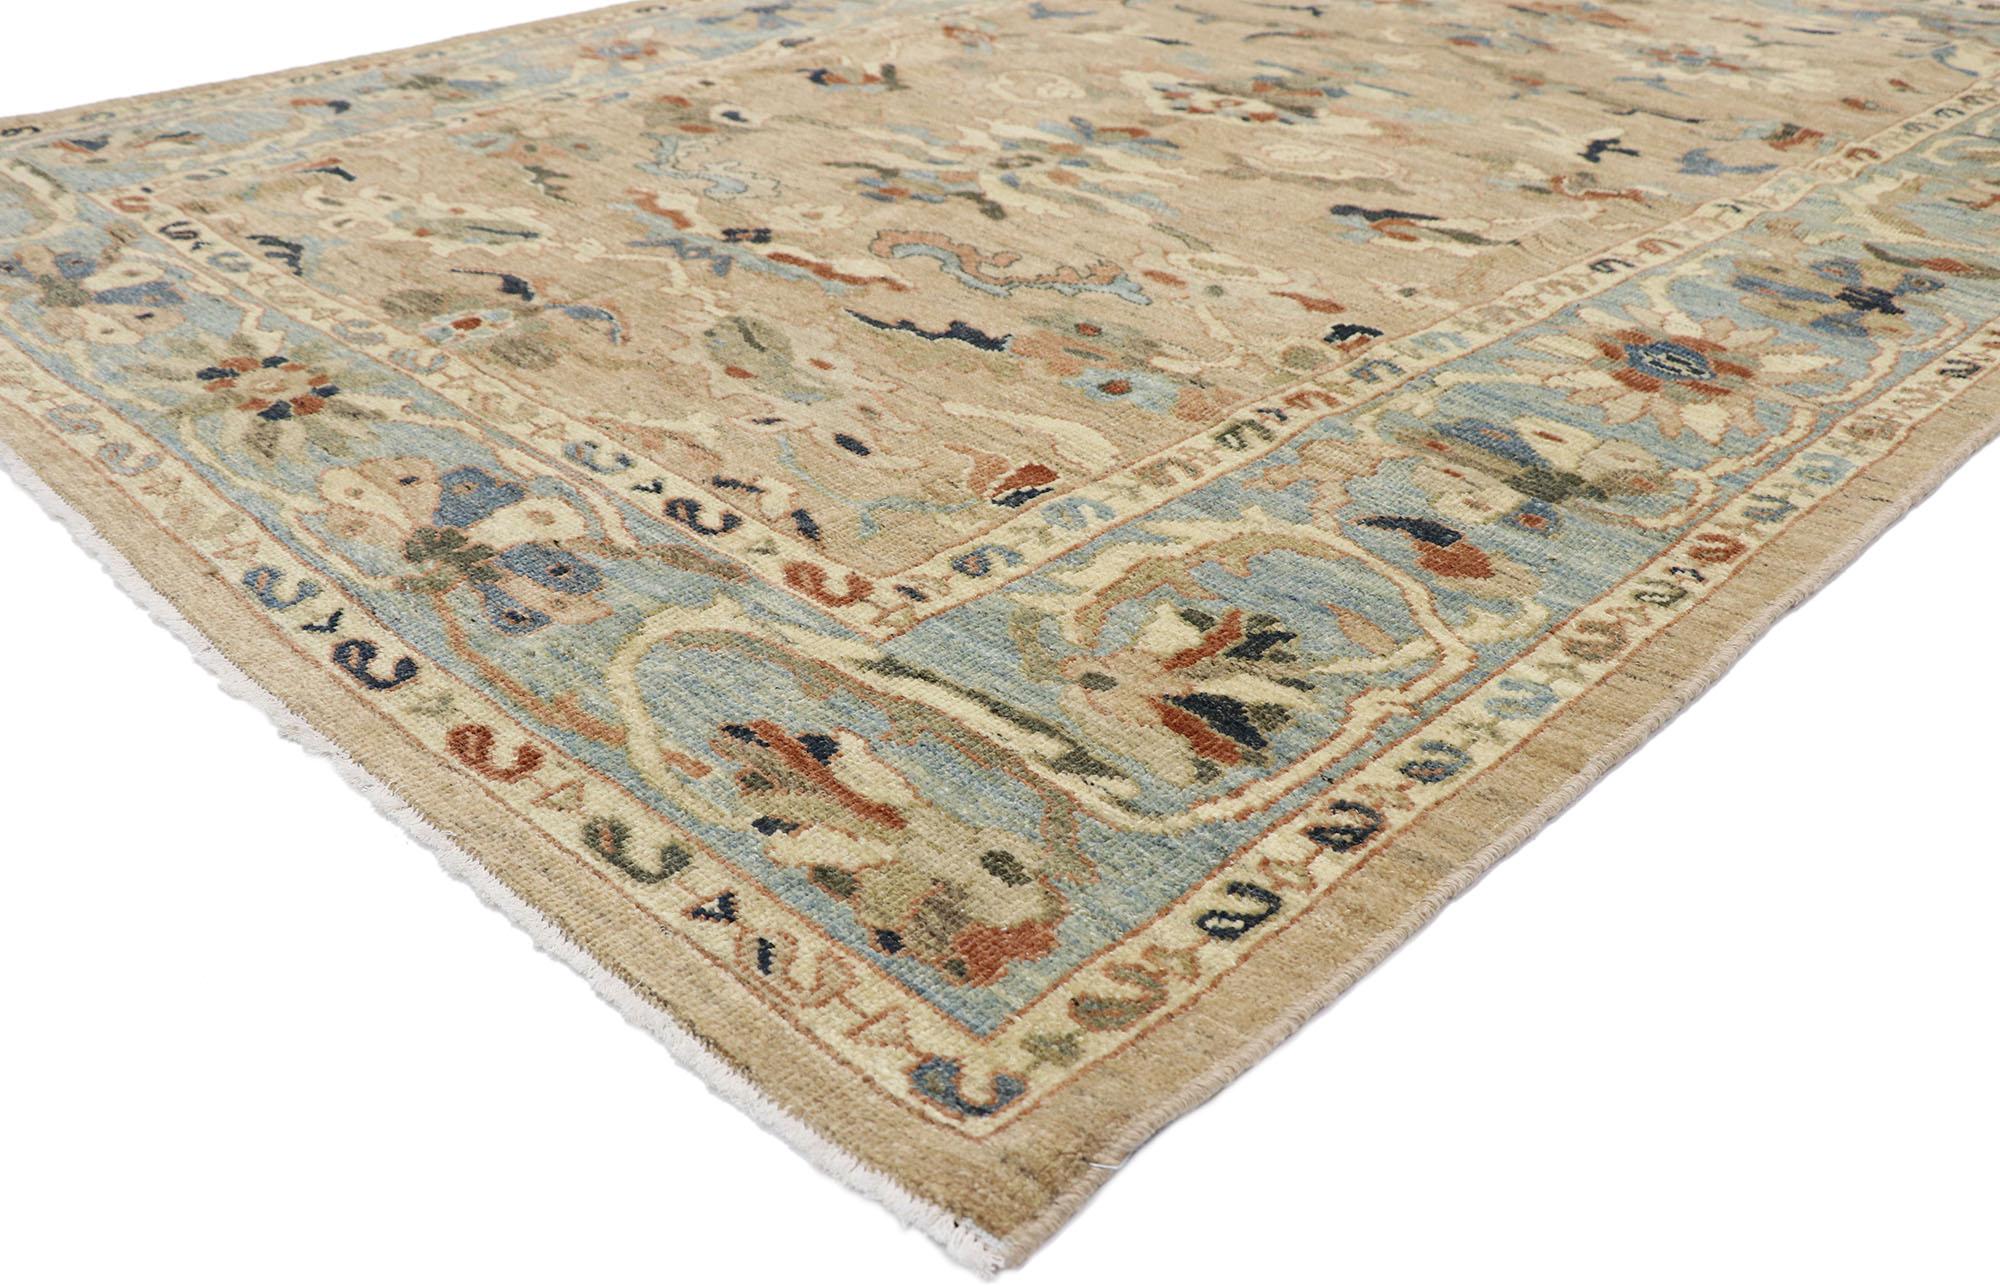 60918 new contemporary Persian Sultanabad rug with Modern style 06'11 x 09'04. This hand-knotted wool contemporary Persian Sultanabad rug features an all-over botanical pattern spread across an abrashed brown field. An array of botanical motifs